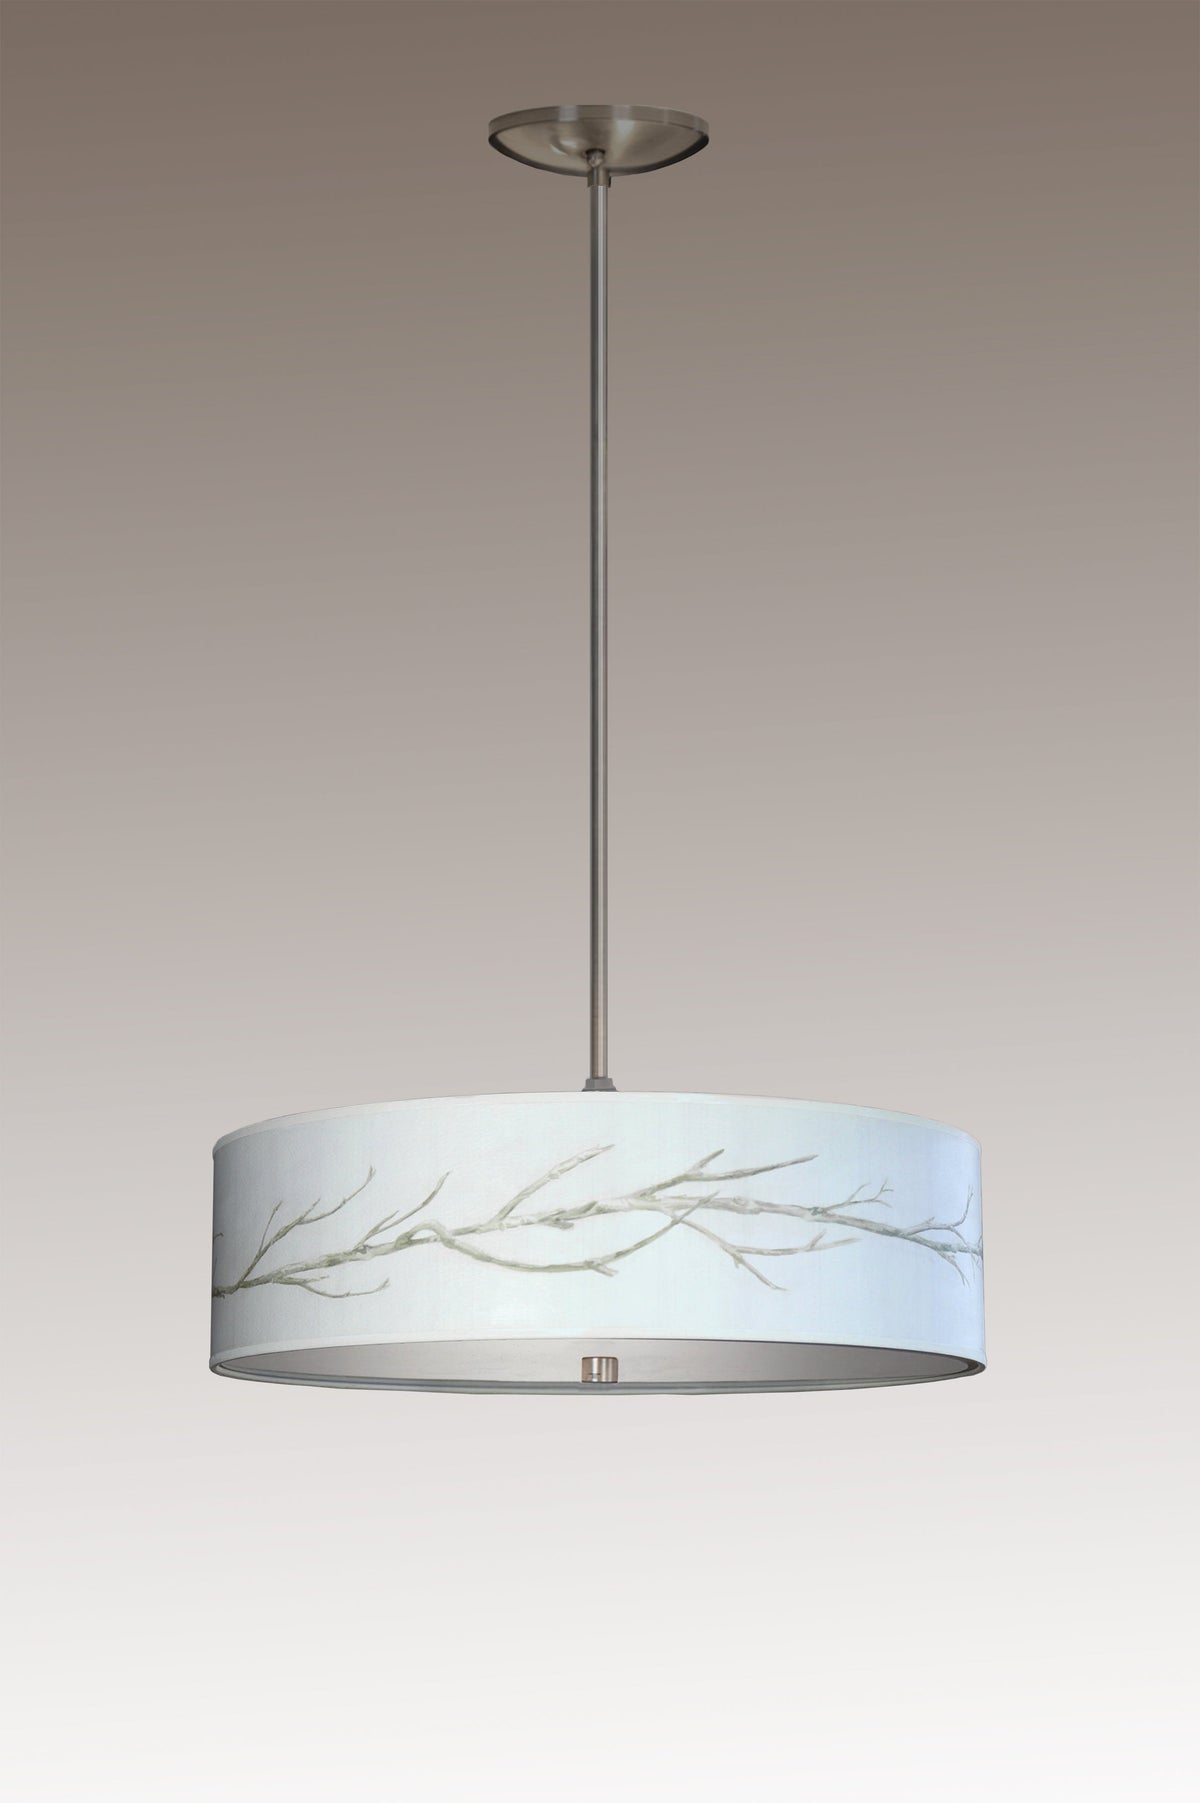 Janna Ugone &amp; Co Ceiling Fixture Skinny Drum Pendant in Sweeping Branch